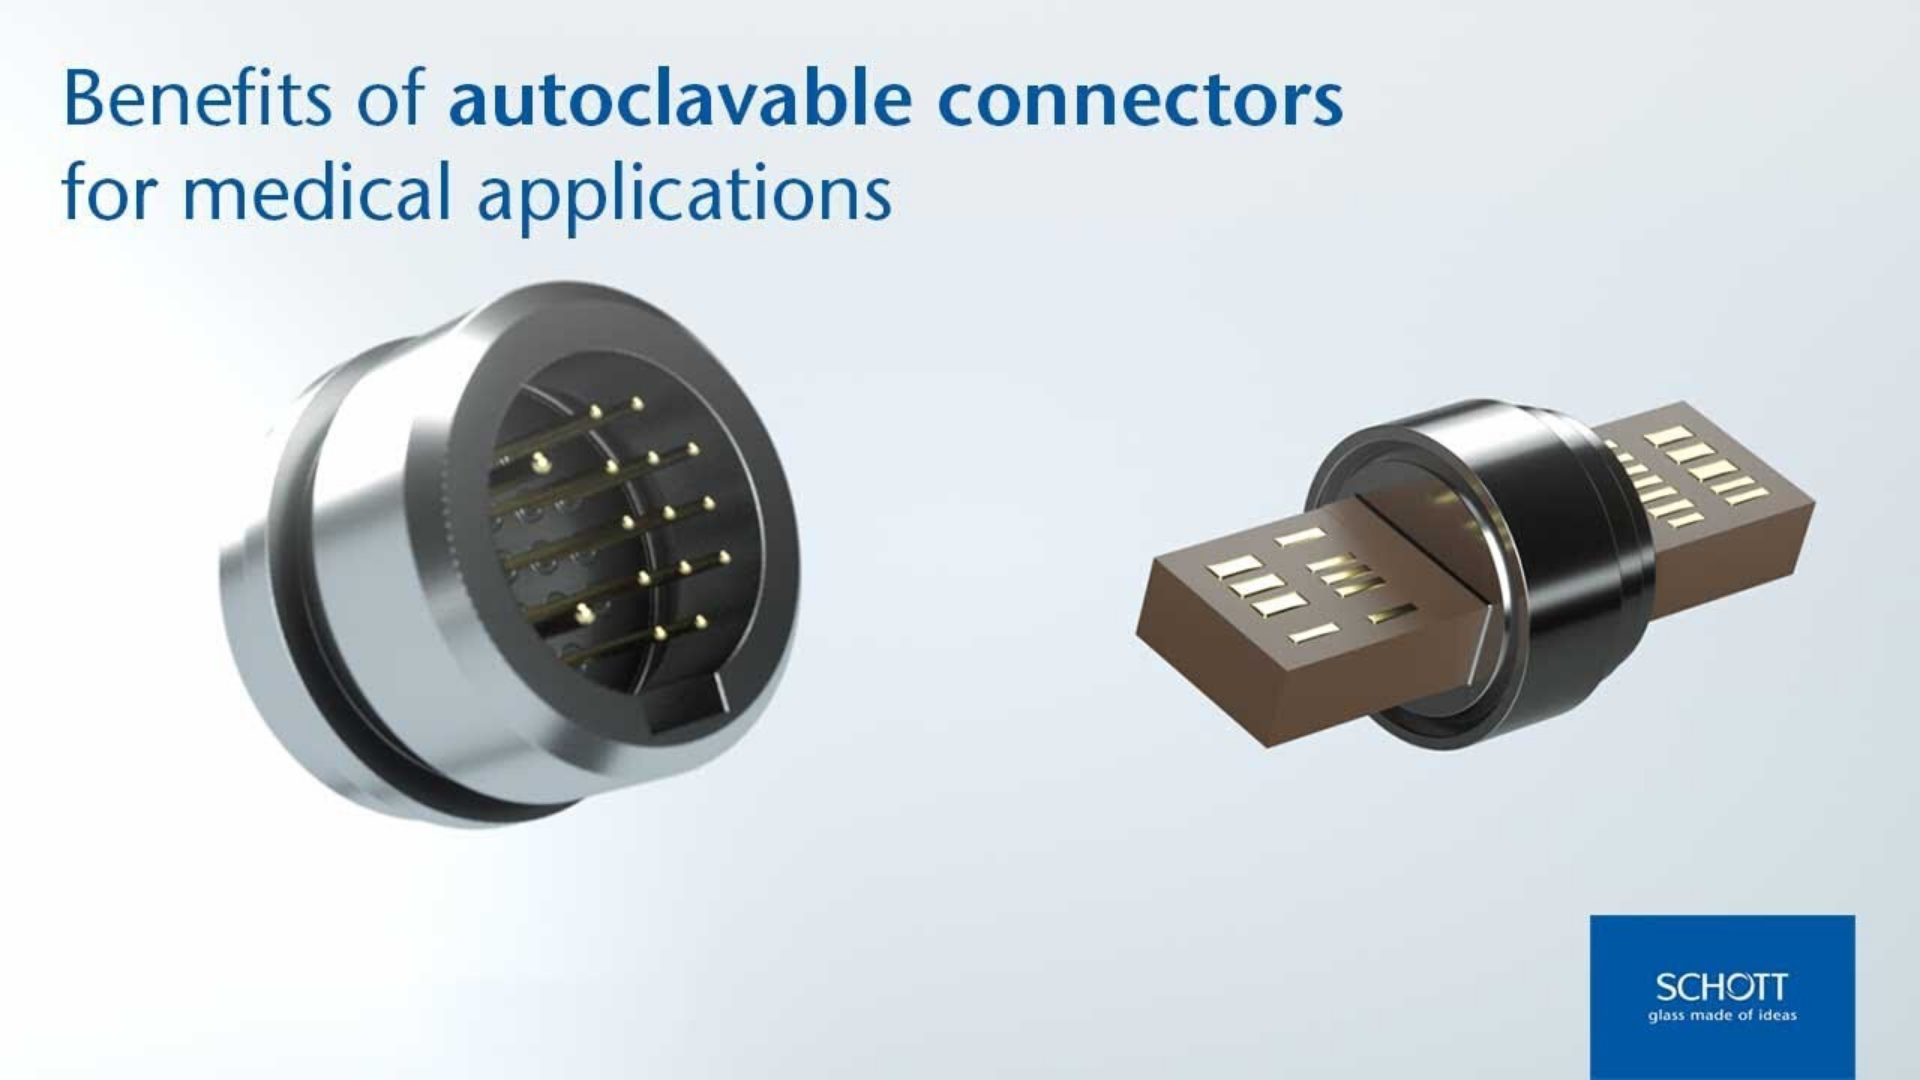 Click to discover why autoclavable connectors are vital for medical applications